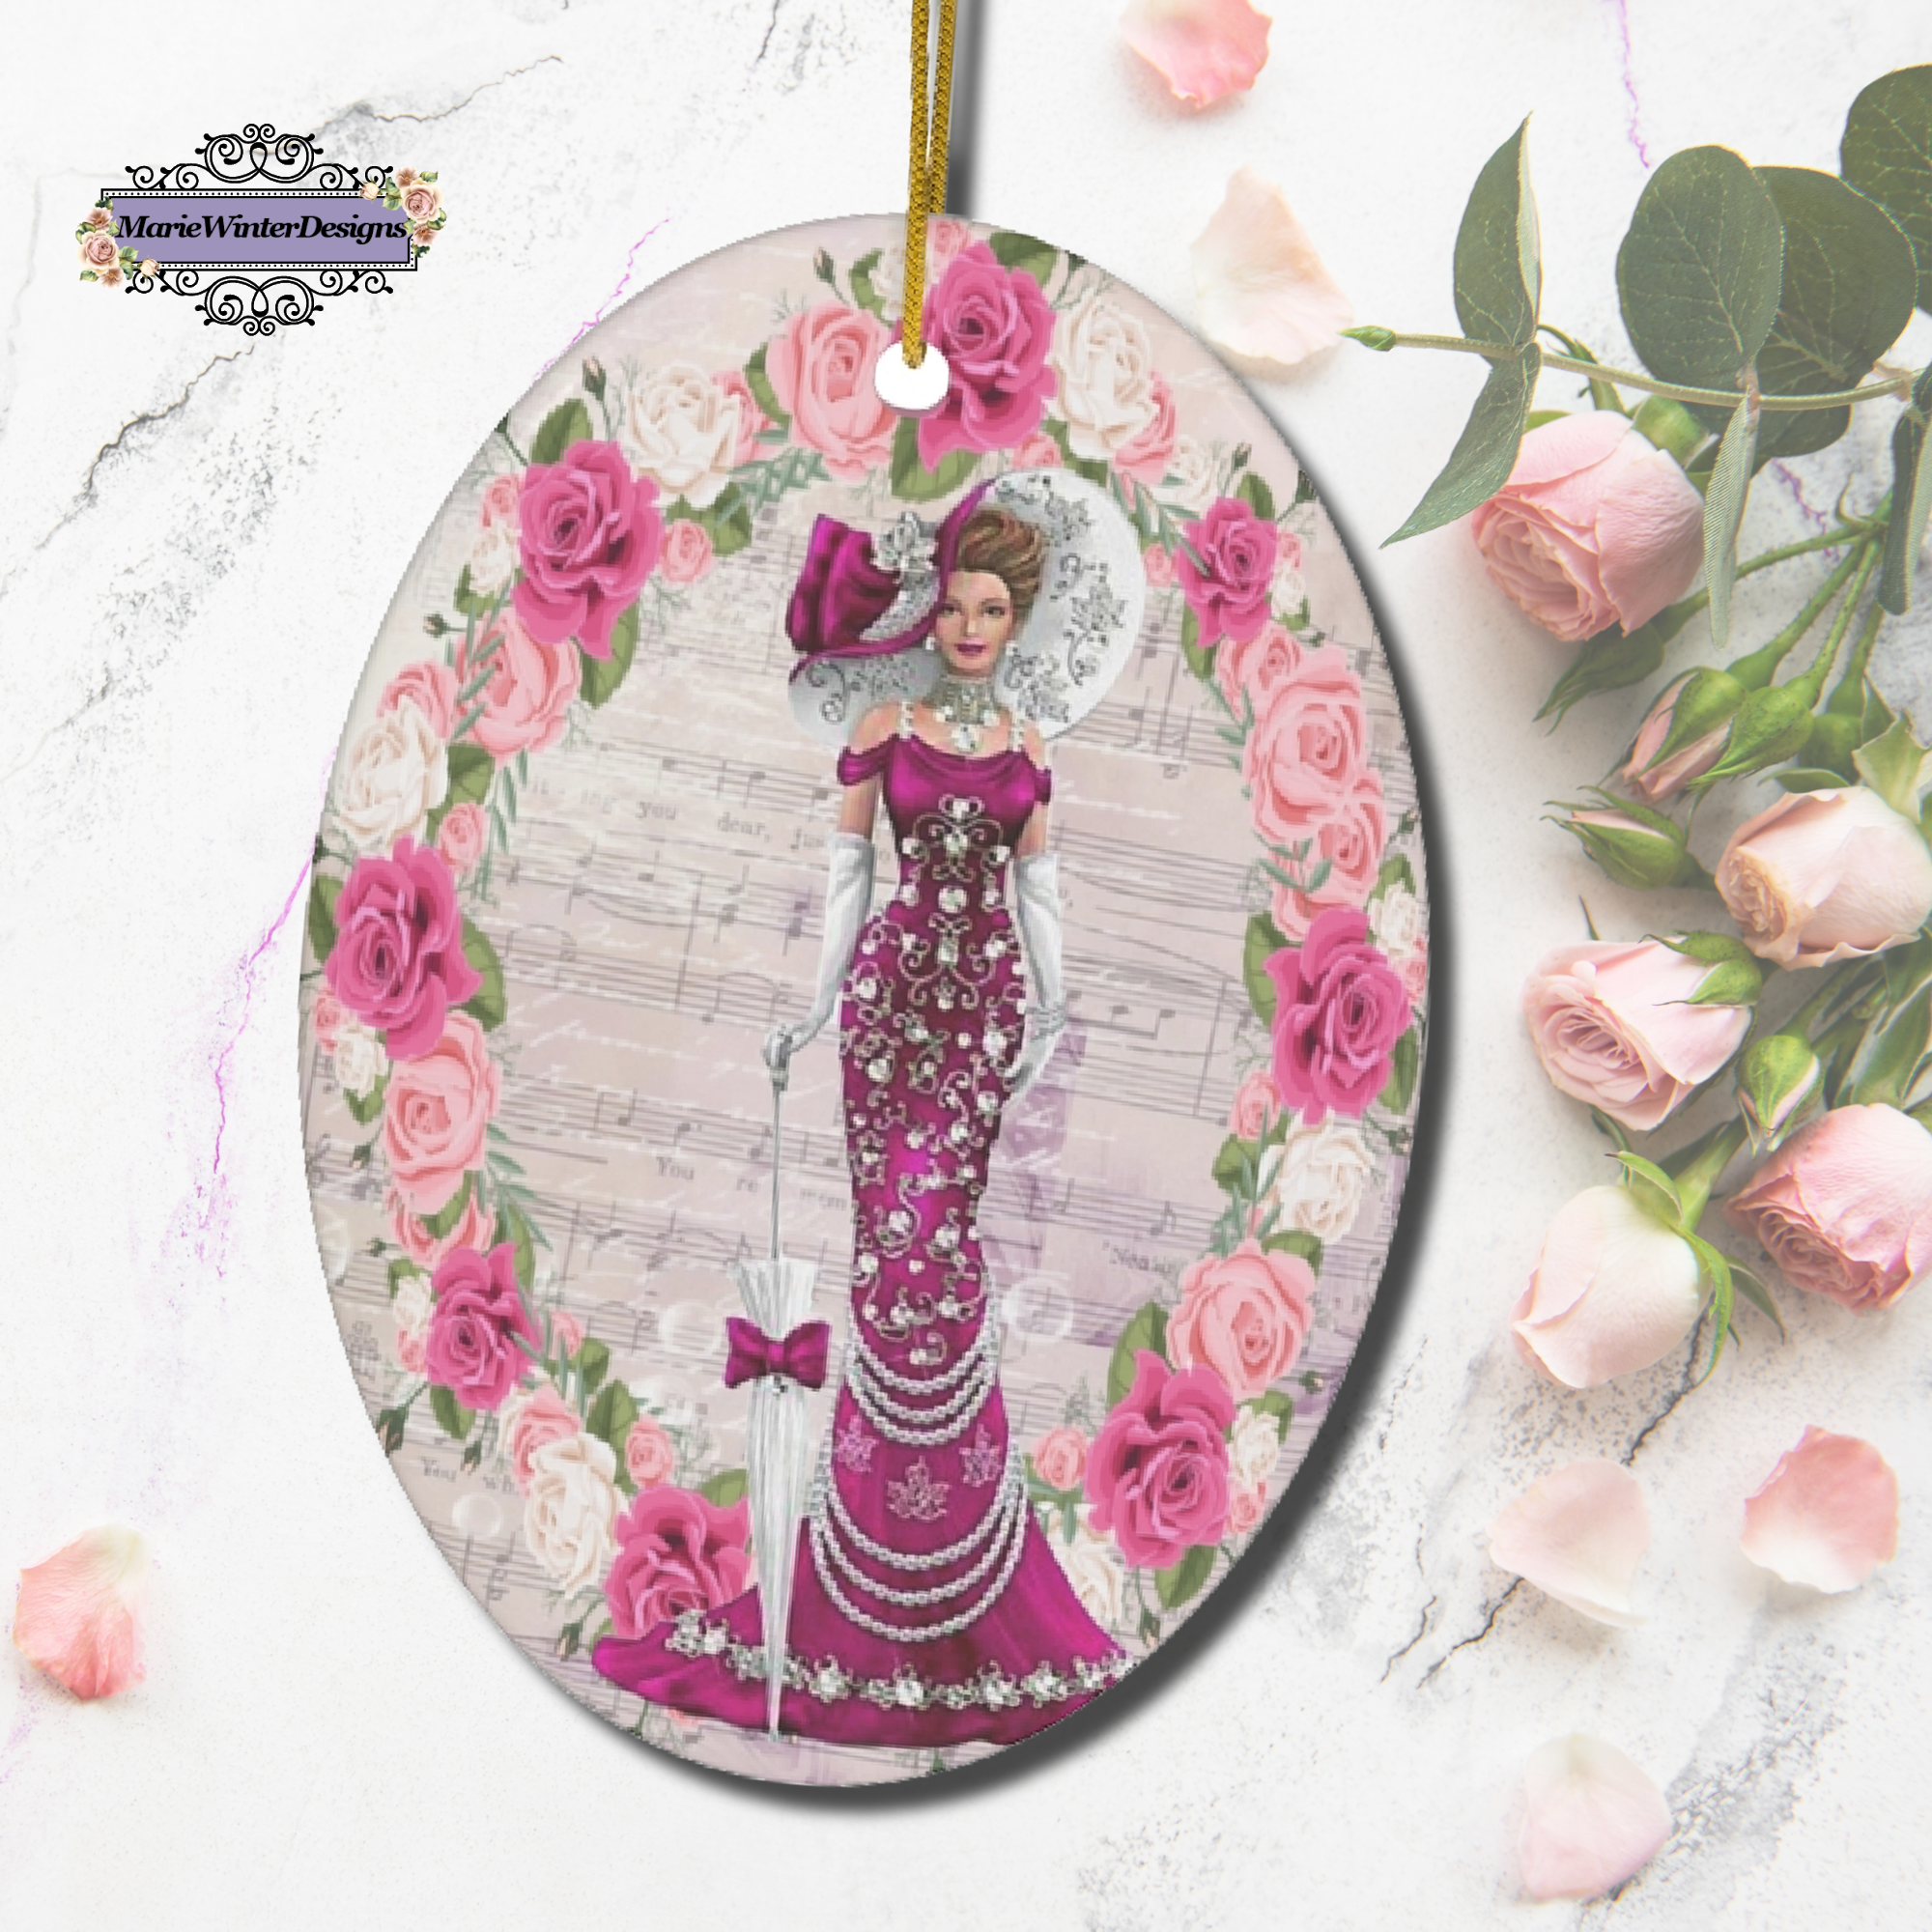 Oval ceramic ornament with Edwardian Lady with large hat music sheet background surrounded with pink and white roses 